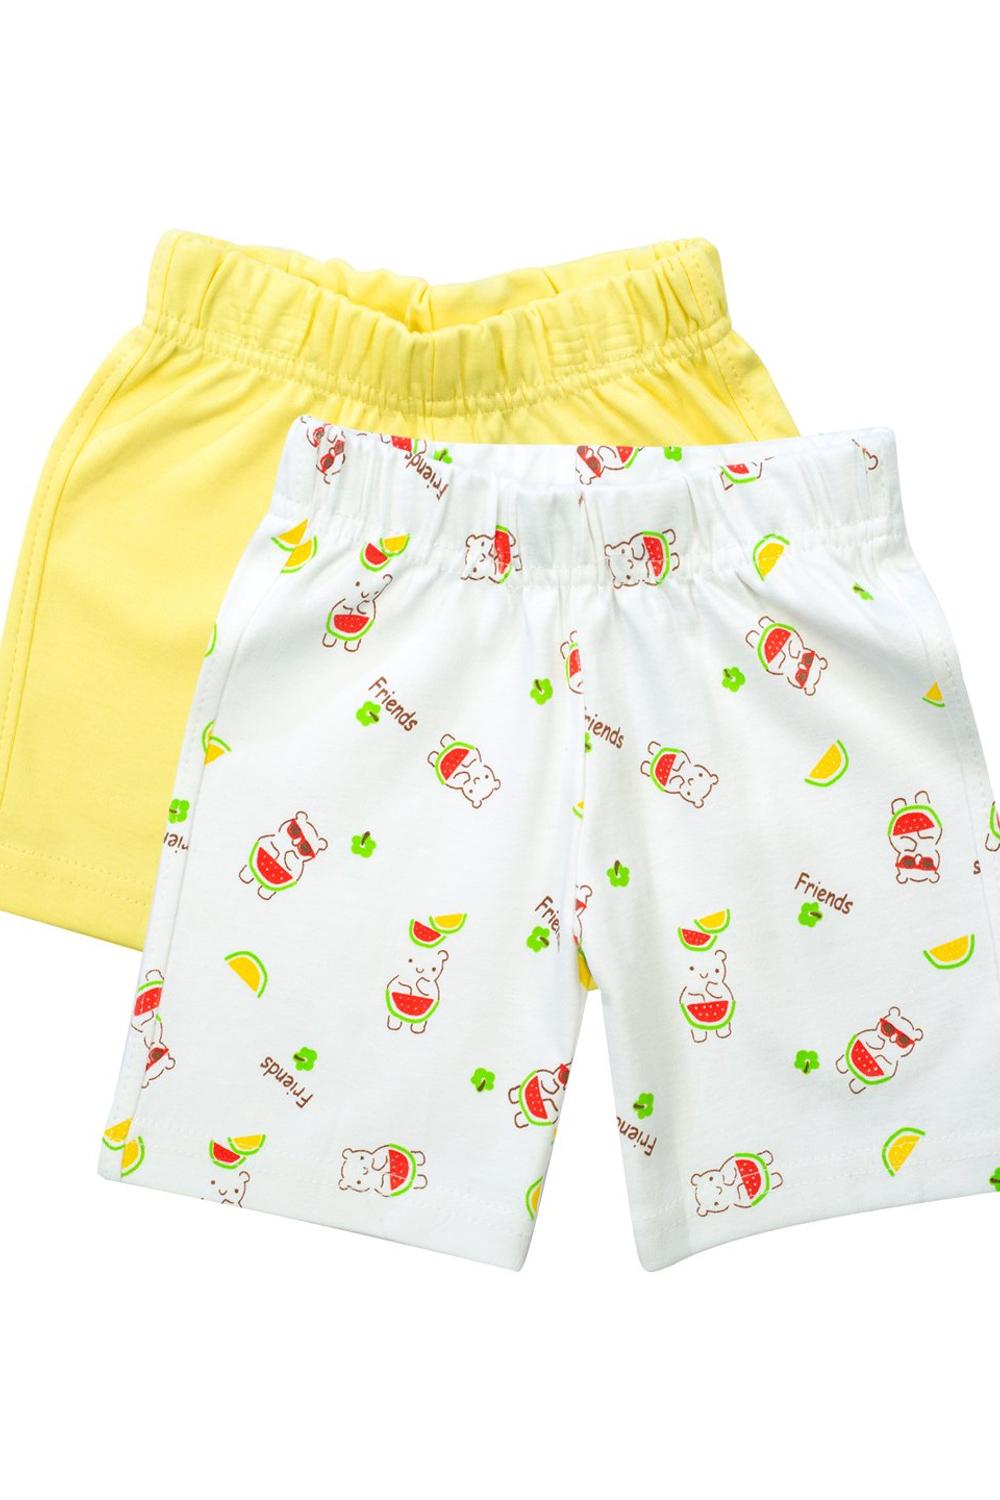 Mee Mee Shorts pack of 2  - Yellow & White Printed